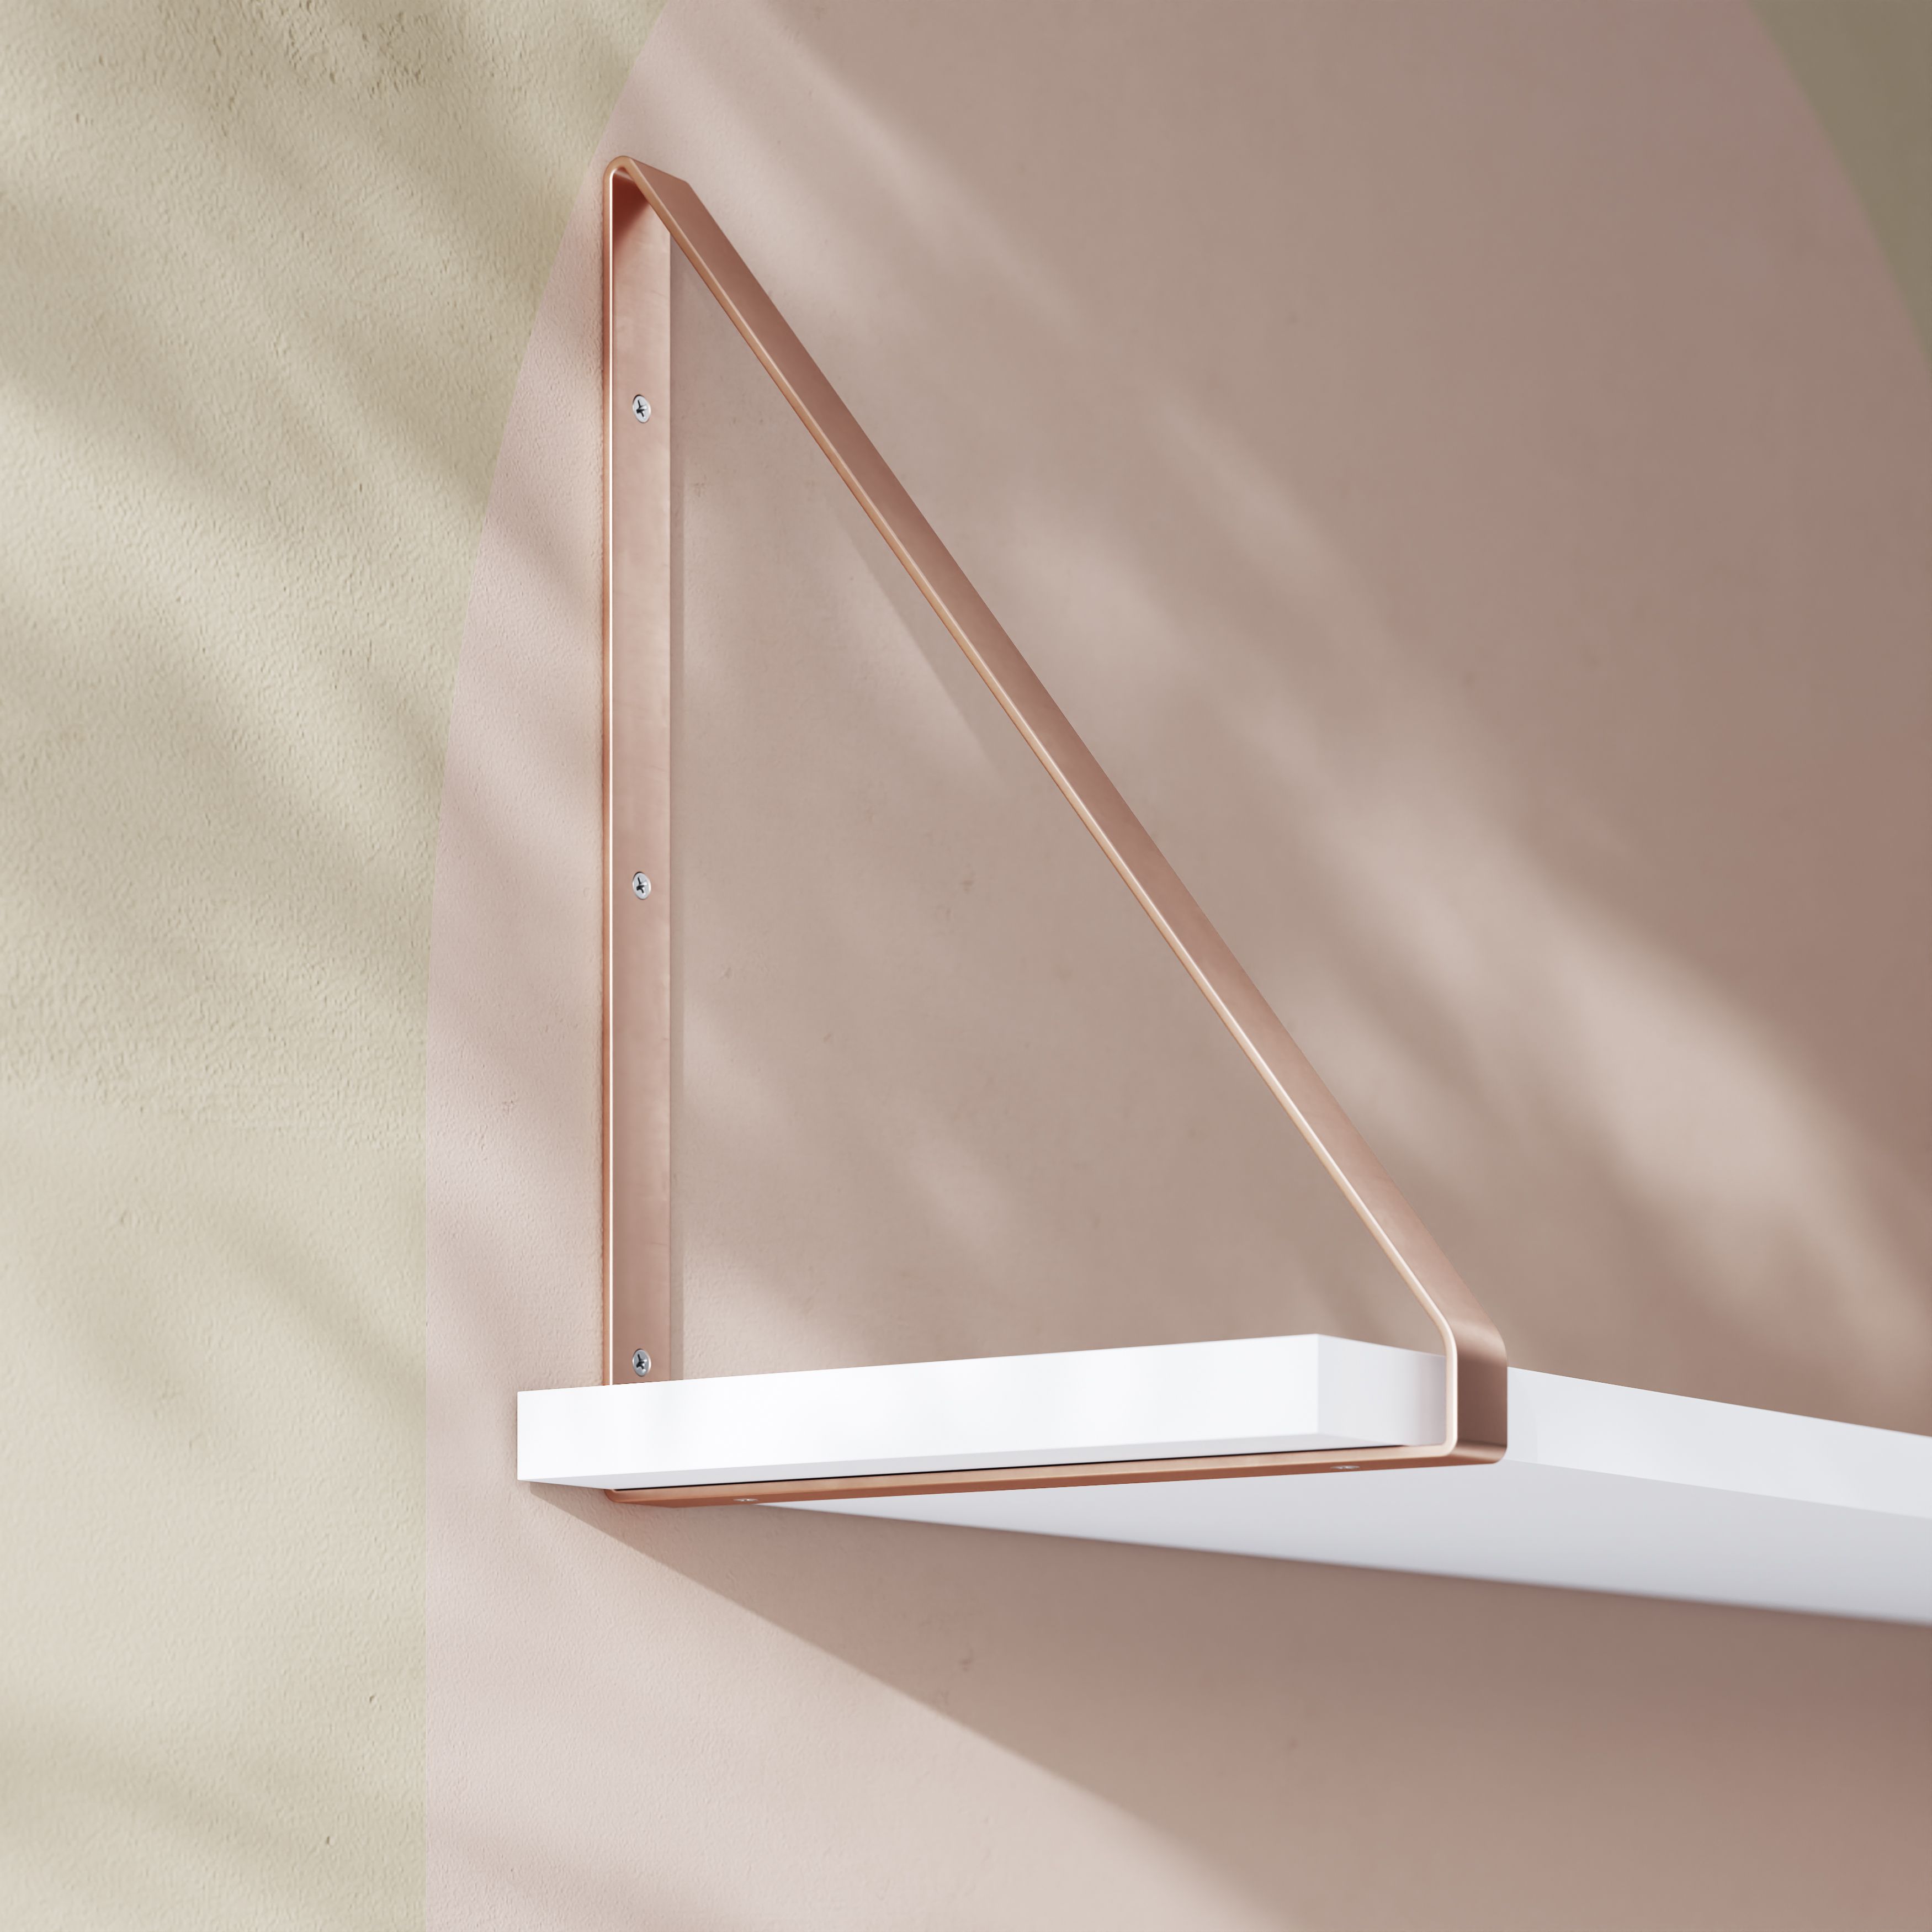 GoodHome Clever Copper effect Steel Shelving bracket (H)280mm (D)200mm